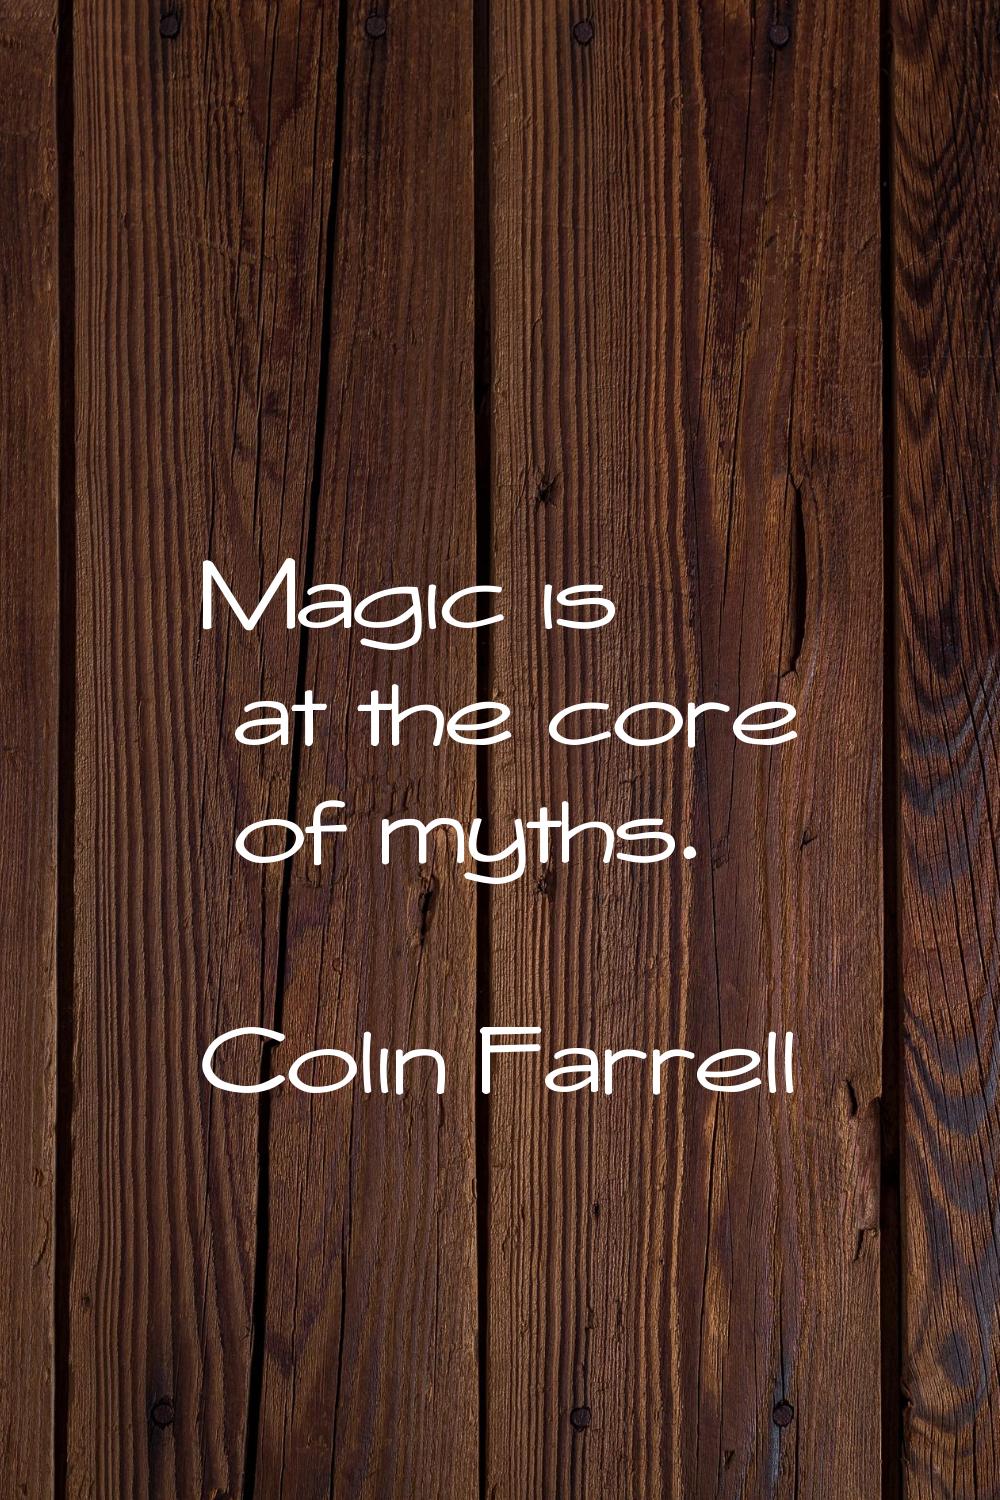 Magic is at the core of myths.